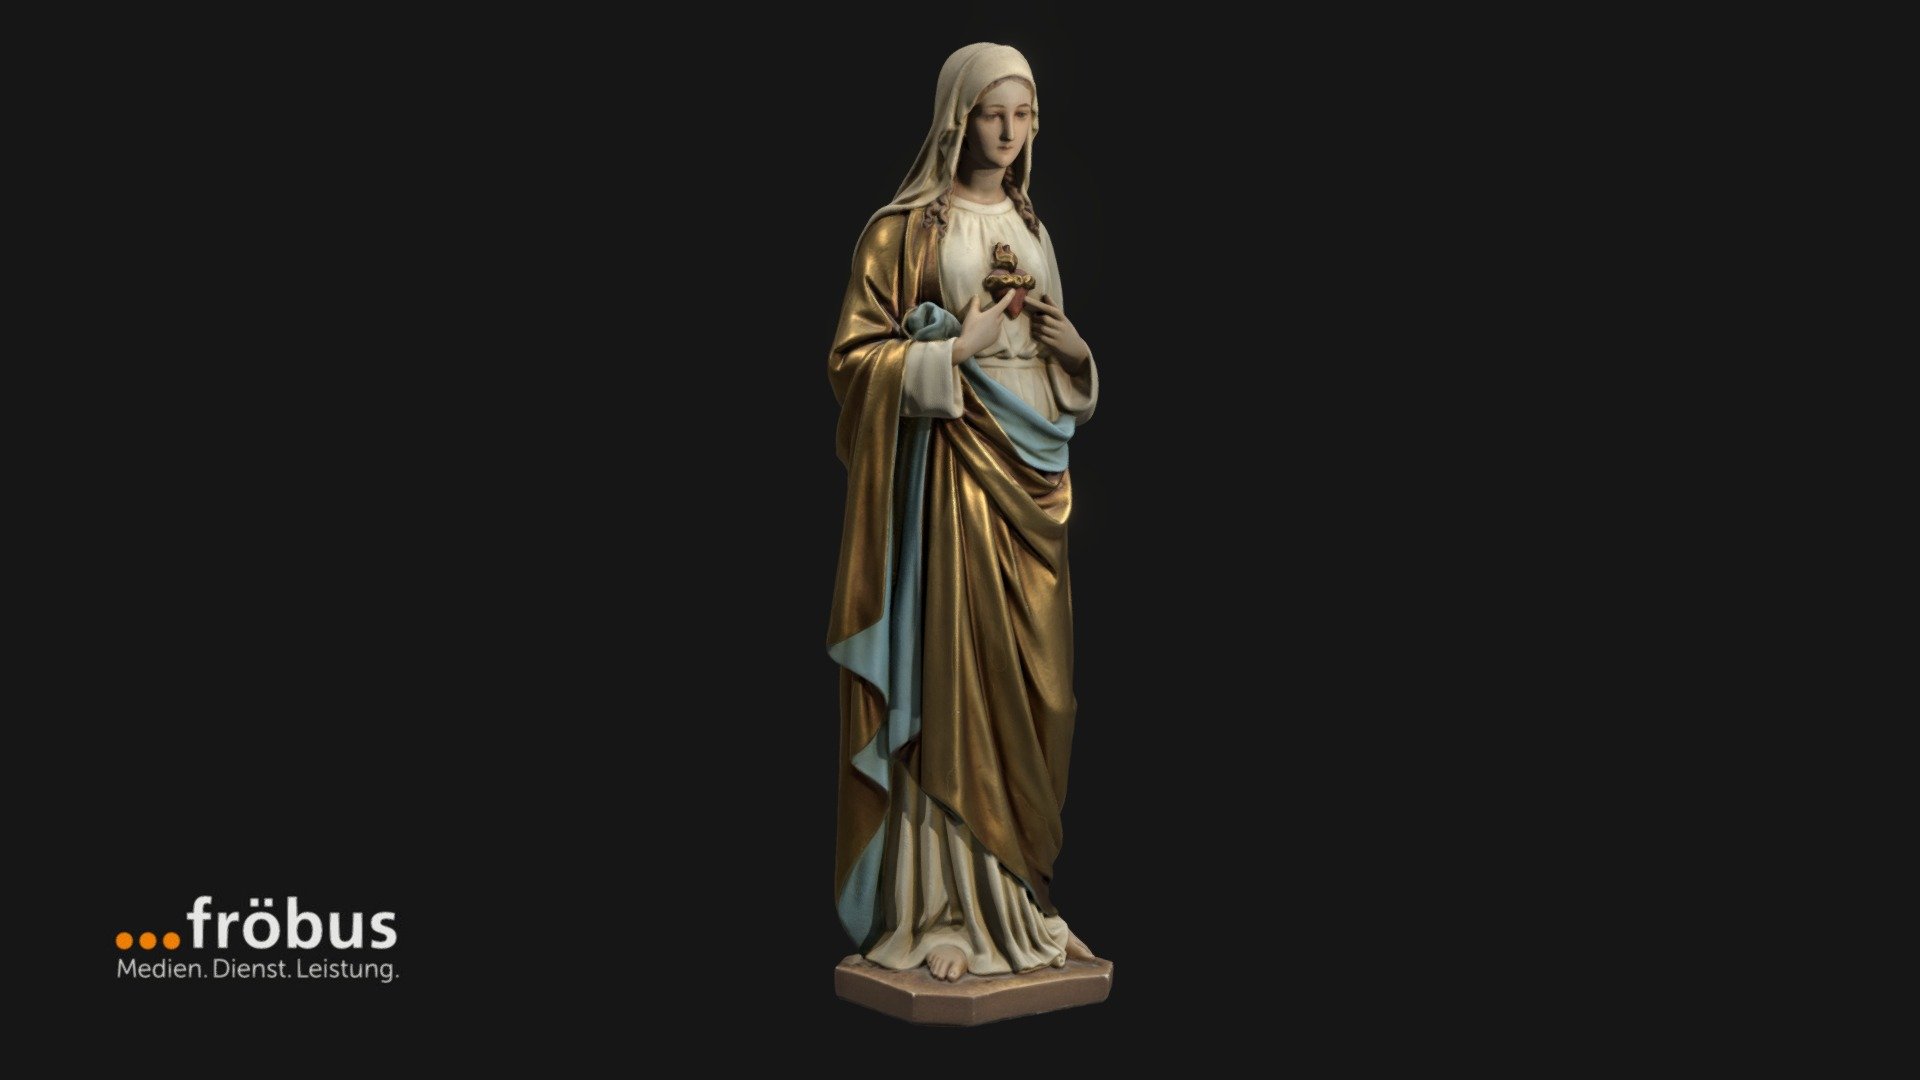 This is a model of a 60cm large Madonnna statue from cologne 3d model